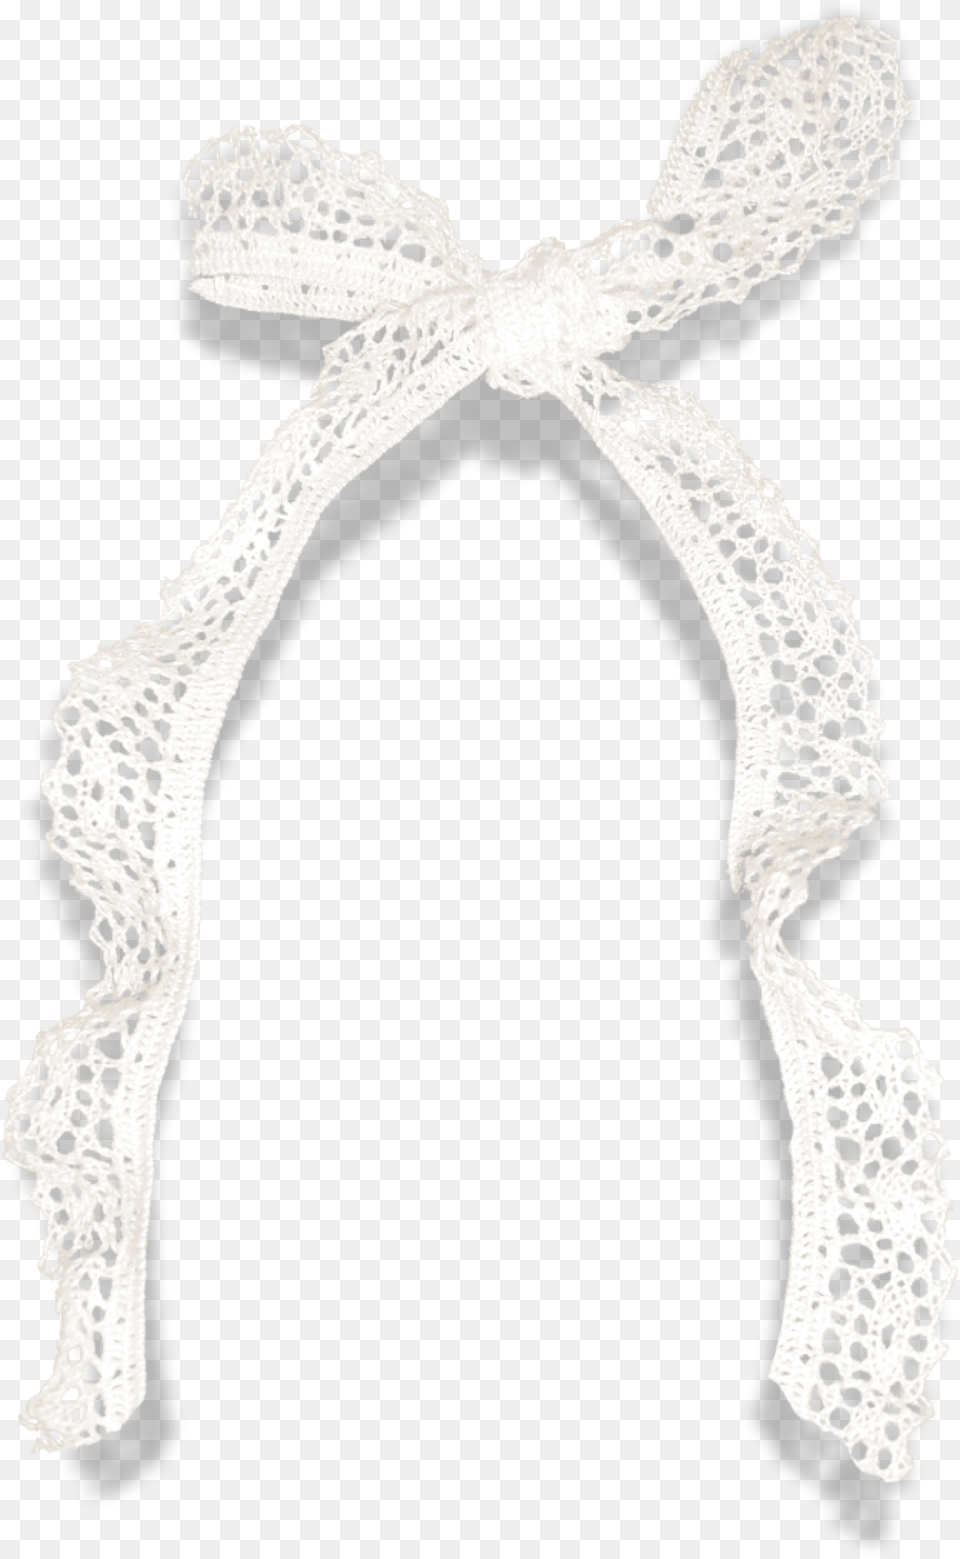 Lace Illustration Free Png Download